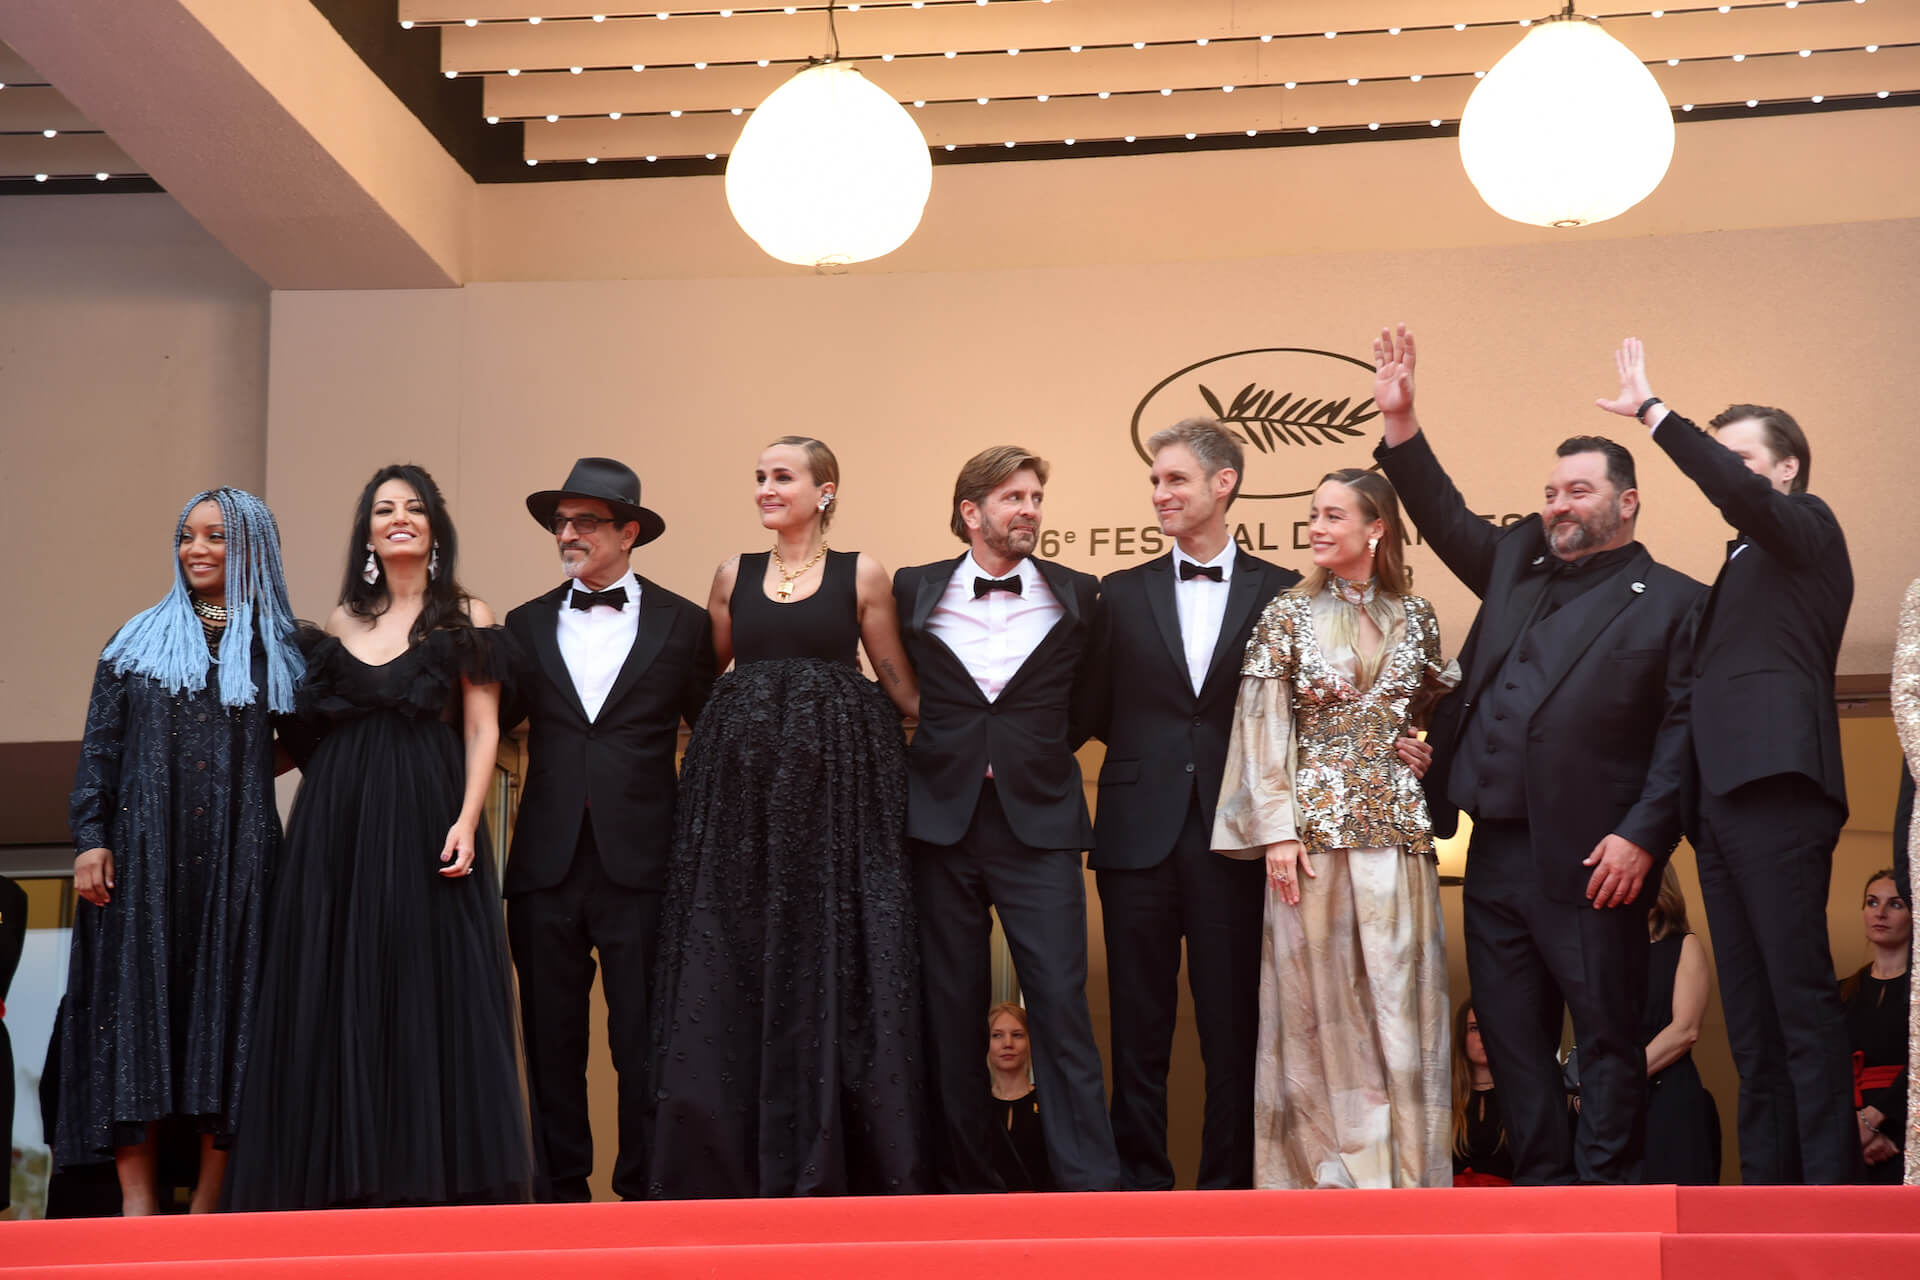 The jury of the 76th Festival de Cannes